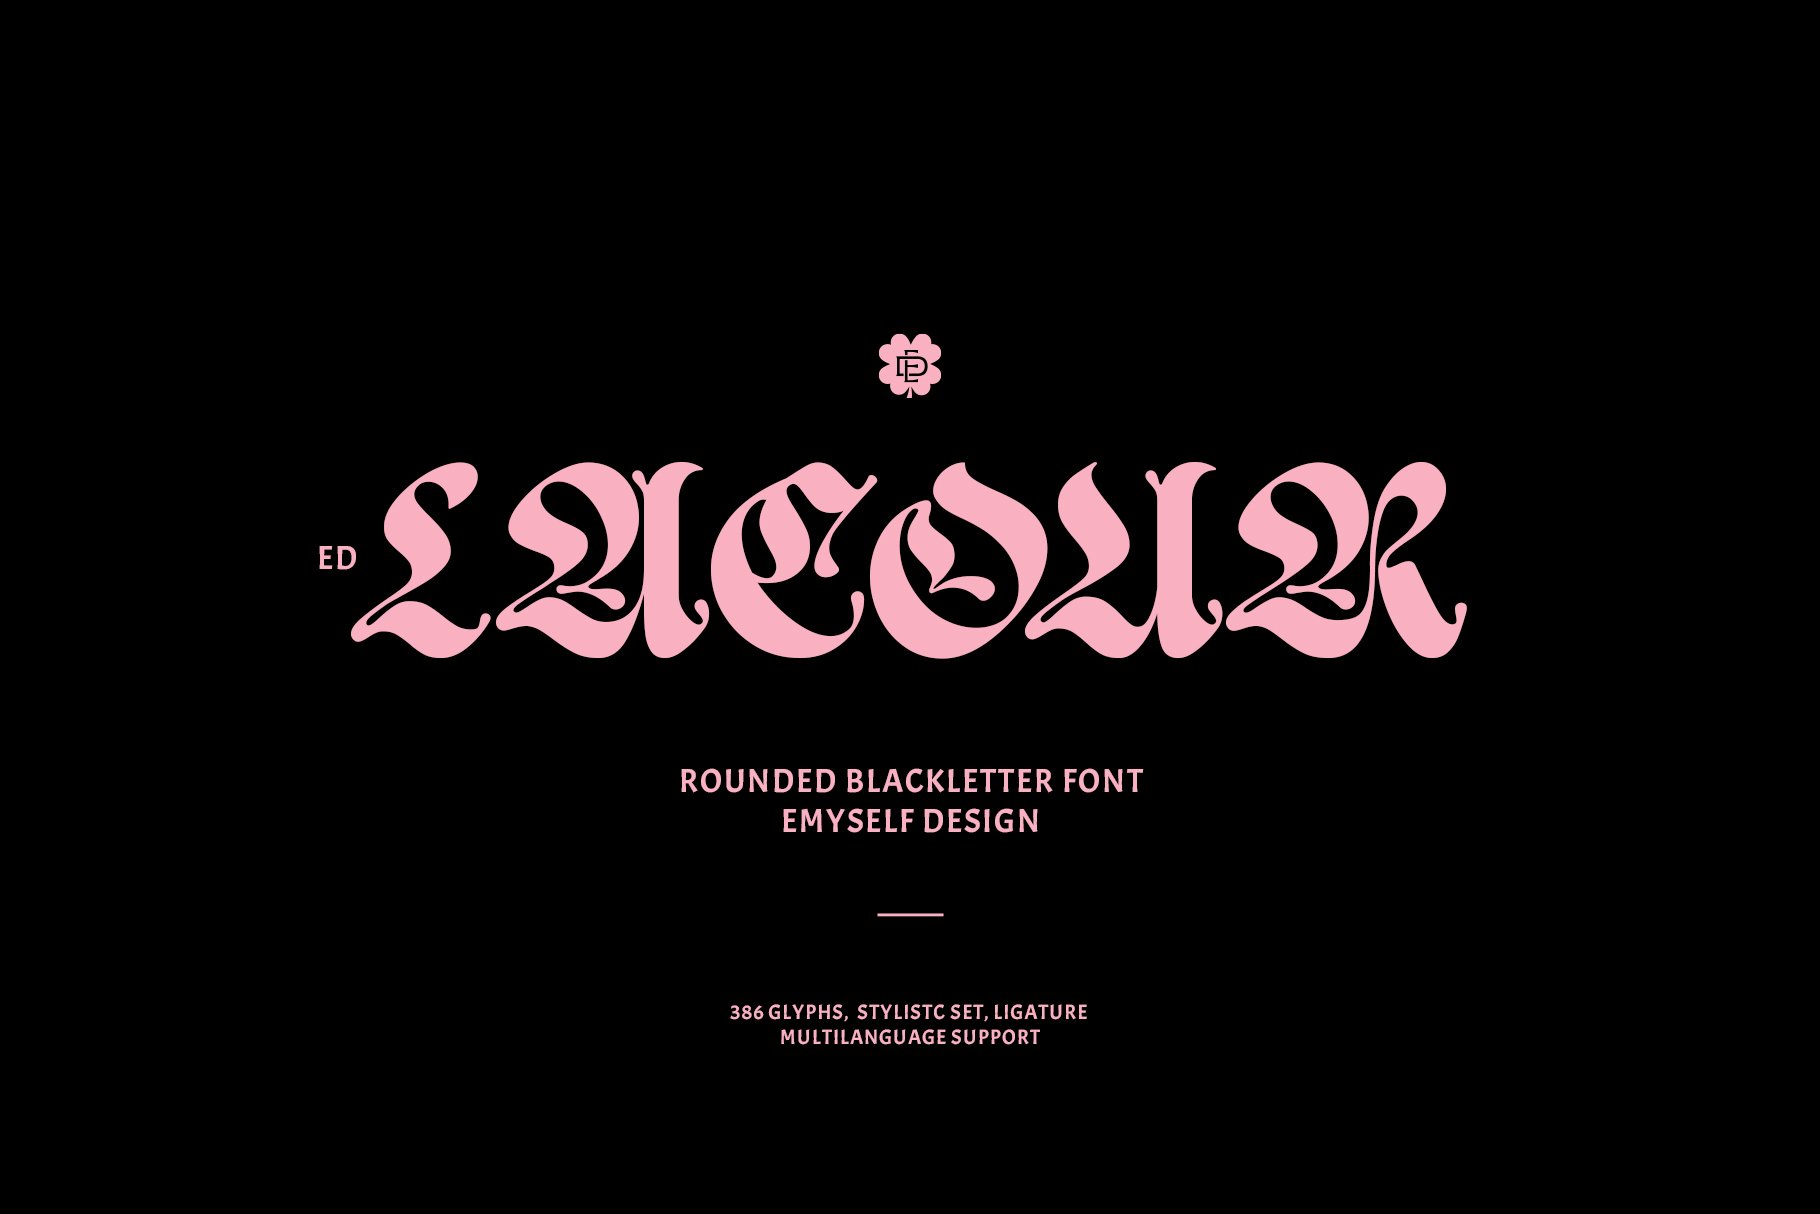 ED Lacour - Blackletter Typeface cover image.